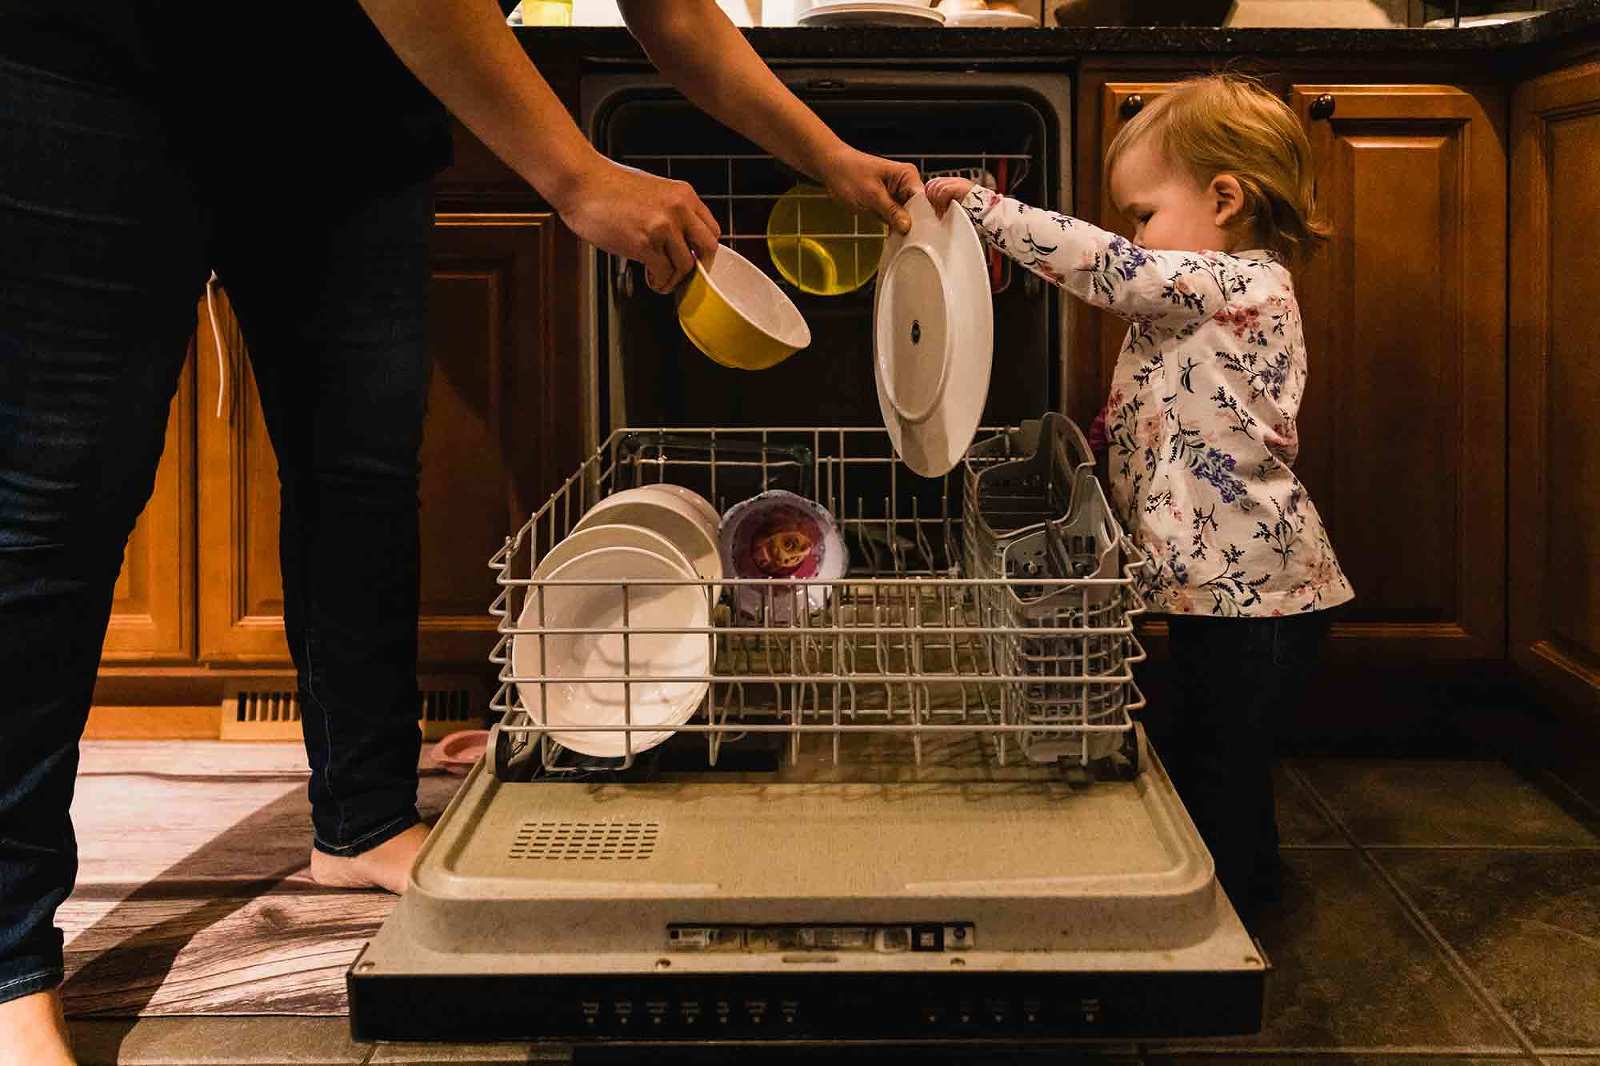 little girl helps mom take dishes out of the dishwasher